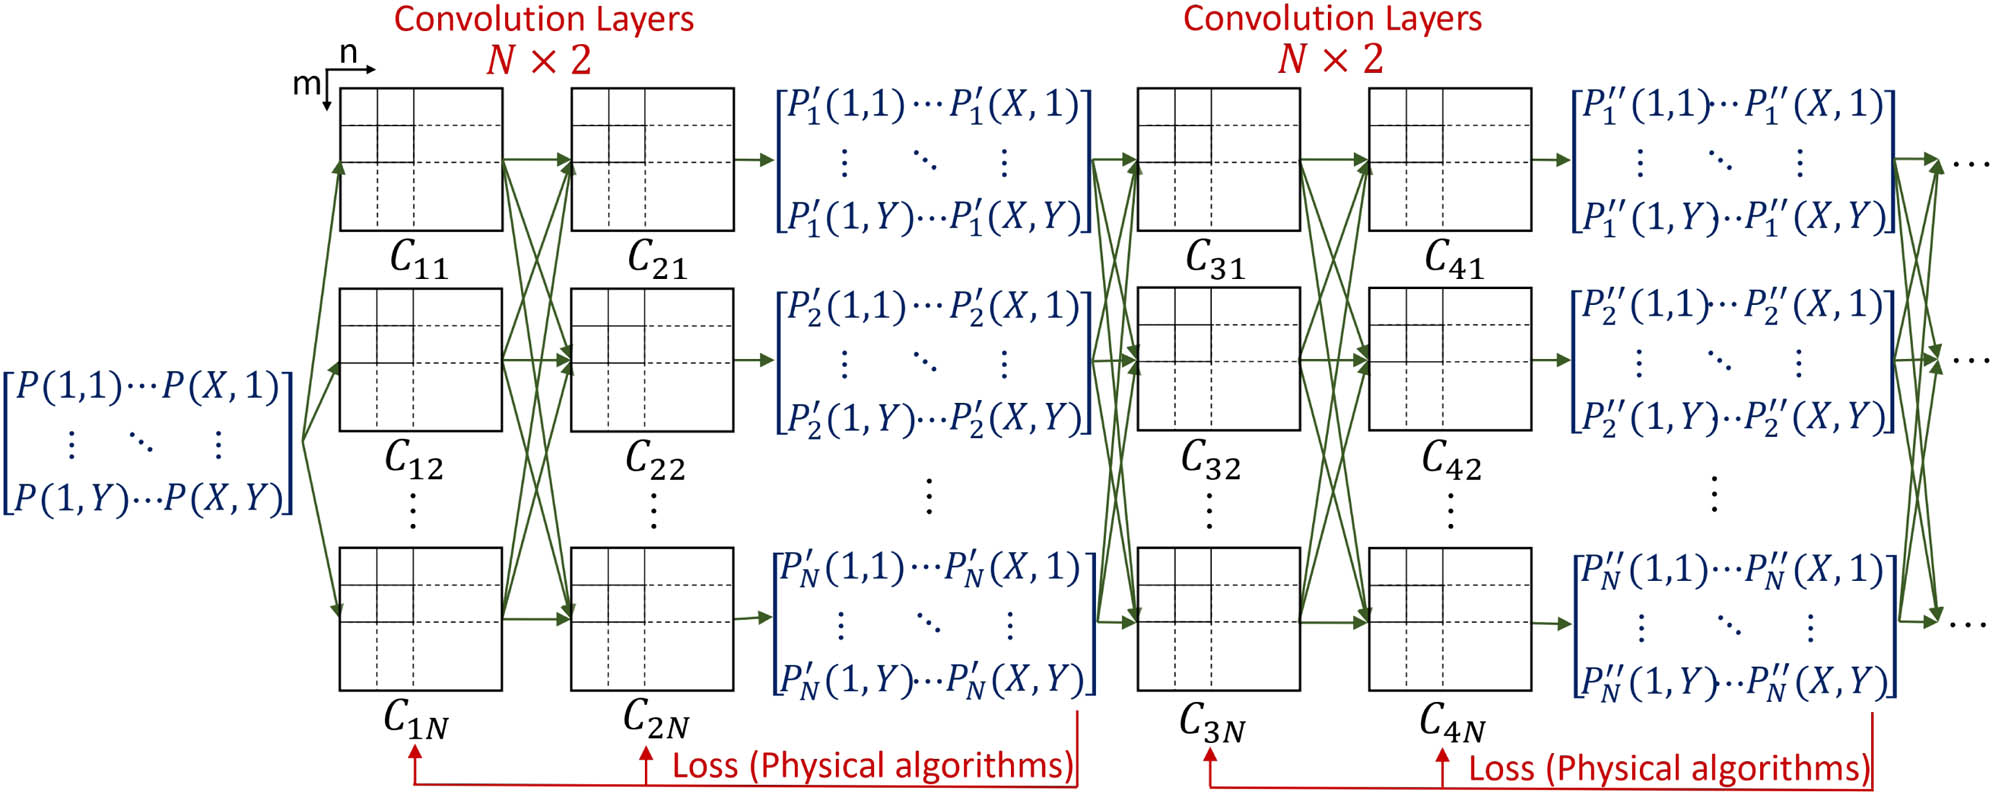 Diagram of Speckle-Net. Speckle-Net consists of multiple branches and two convolution layers within each branch. Subscripts j and i in Cji denote the jth layer and ith kernel in each layer. N kernels are adopted in each layer. A physical algorithm related loss function feedback is applied at the end of each branch to modify the kernels by gradient descent.